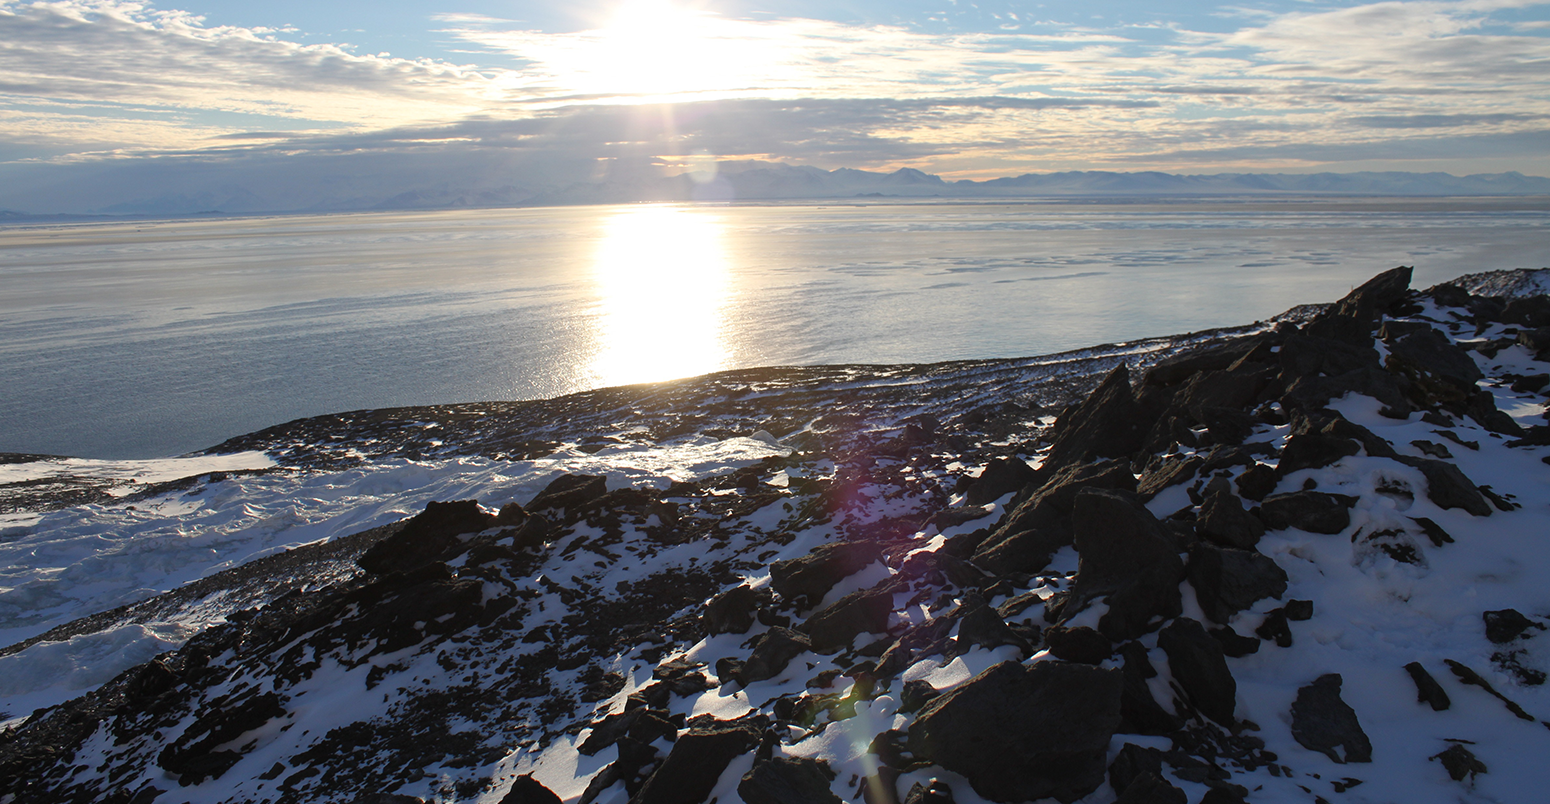 View of the Southern Ocean of the coast of Antarctica. Hut Point Loop Hike.